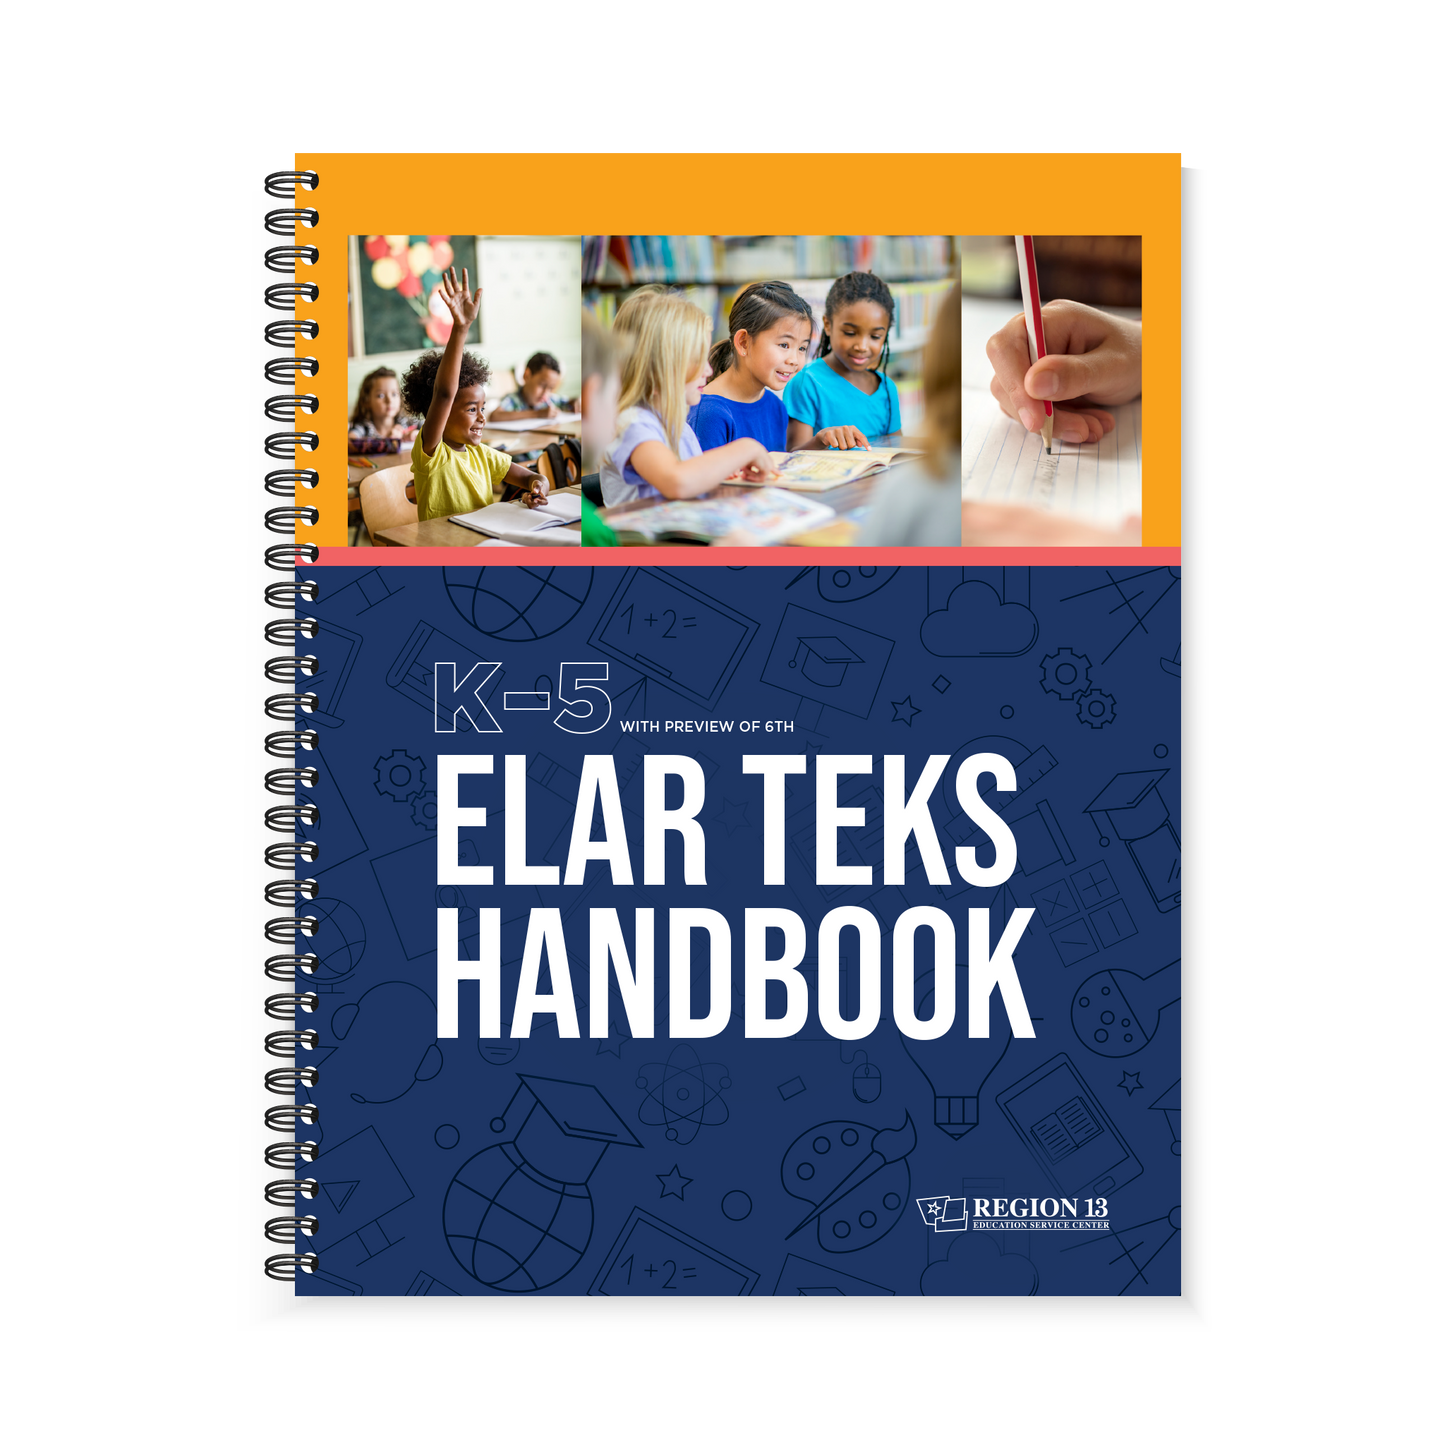 Cover images, one with a kid raising their hand, another with three kids reading a book together, and a third depcition of hand writing on lined paper on the front of the Region 13 ELAR TEKS Handbook: K-5 (Spiral-Bound) book.